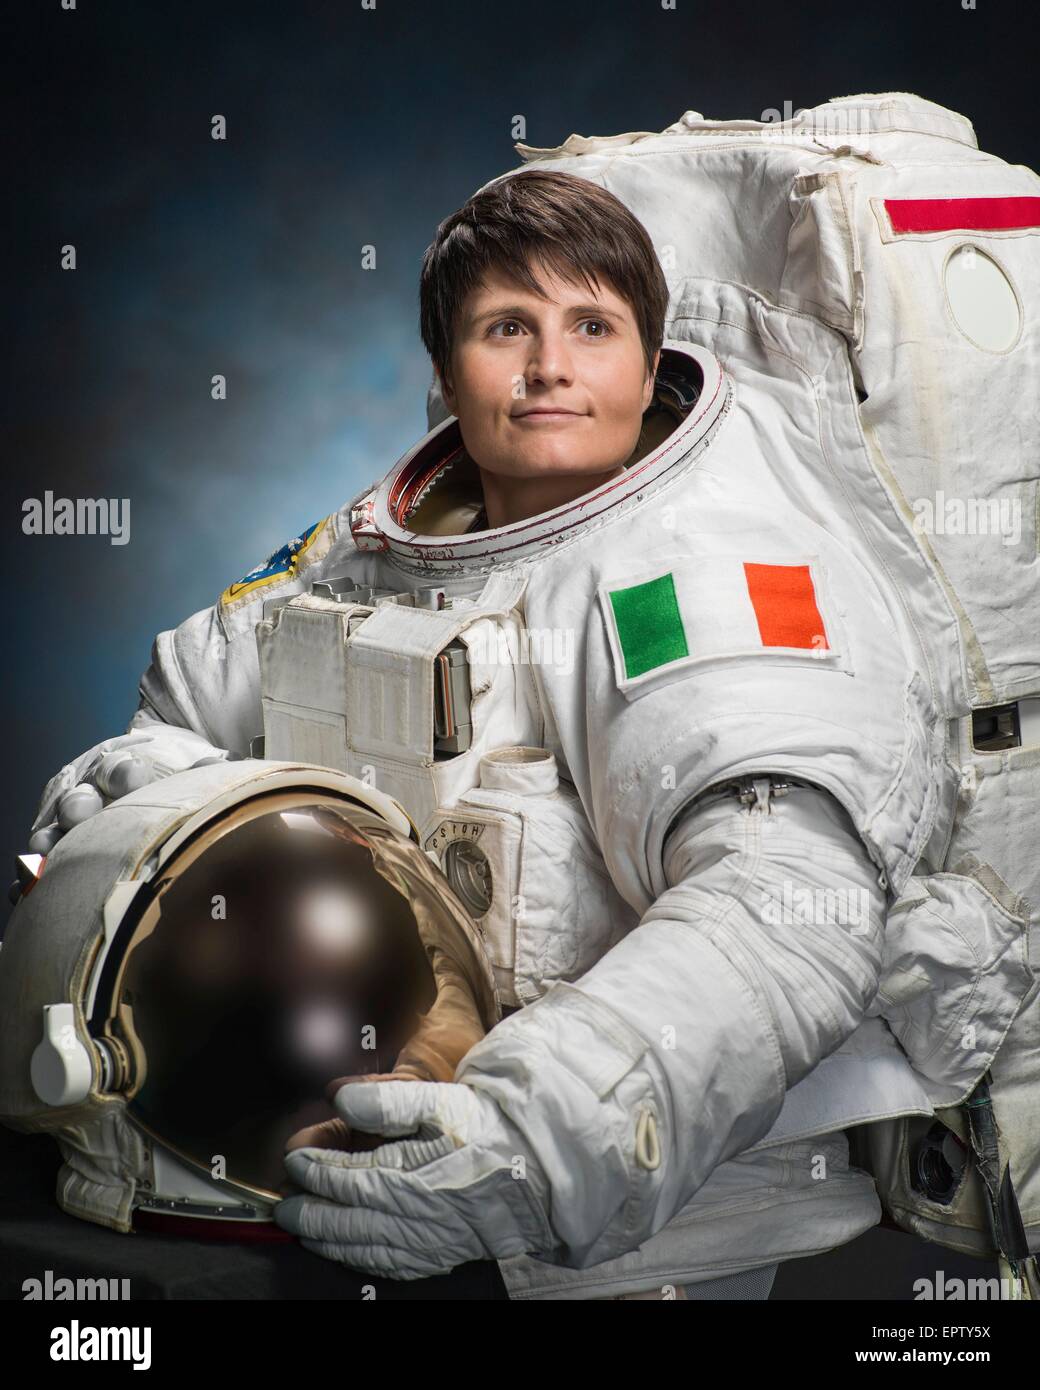 Astronaut Samantha Cristoforetti of the European Space Agency official portrait in an Extravehicular Mobility Unit spacesuit at the Johnson Space Center August 21, 2013 in Houston, Texas. Stock Photo